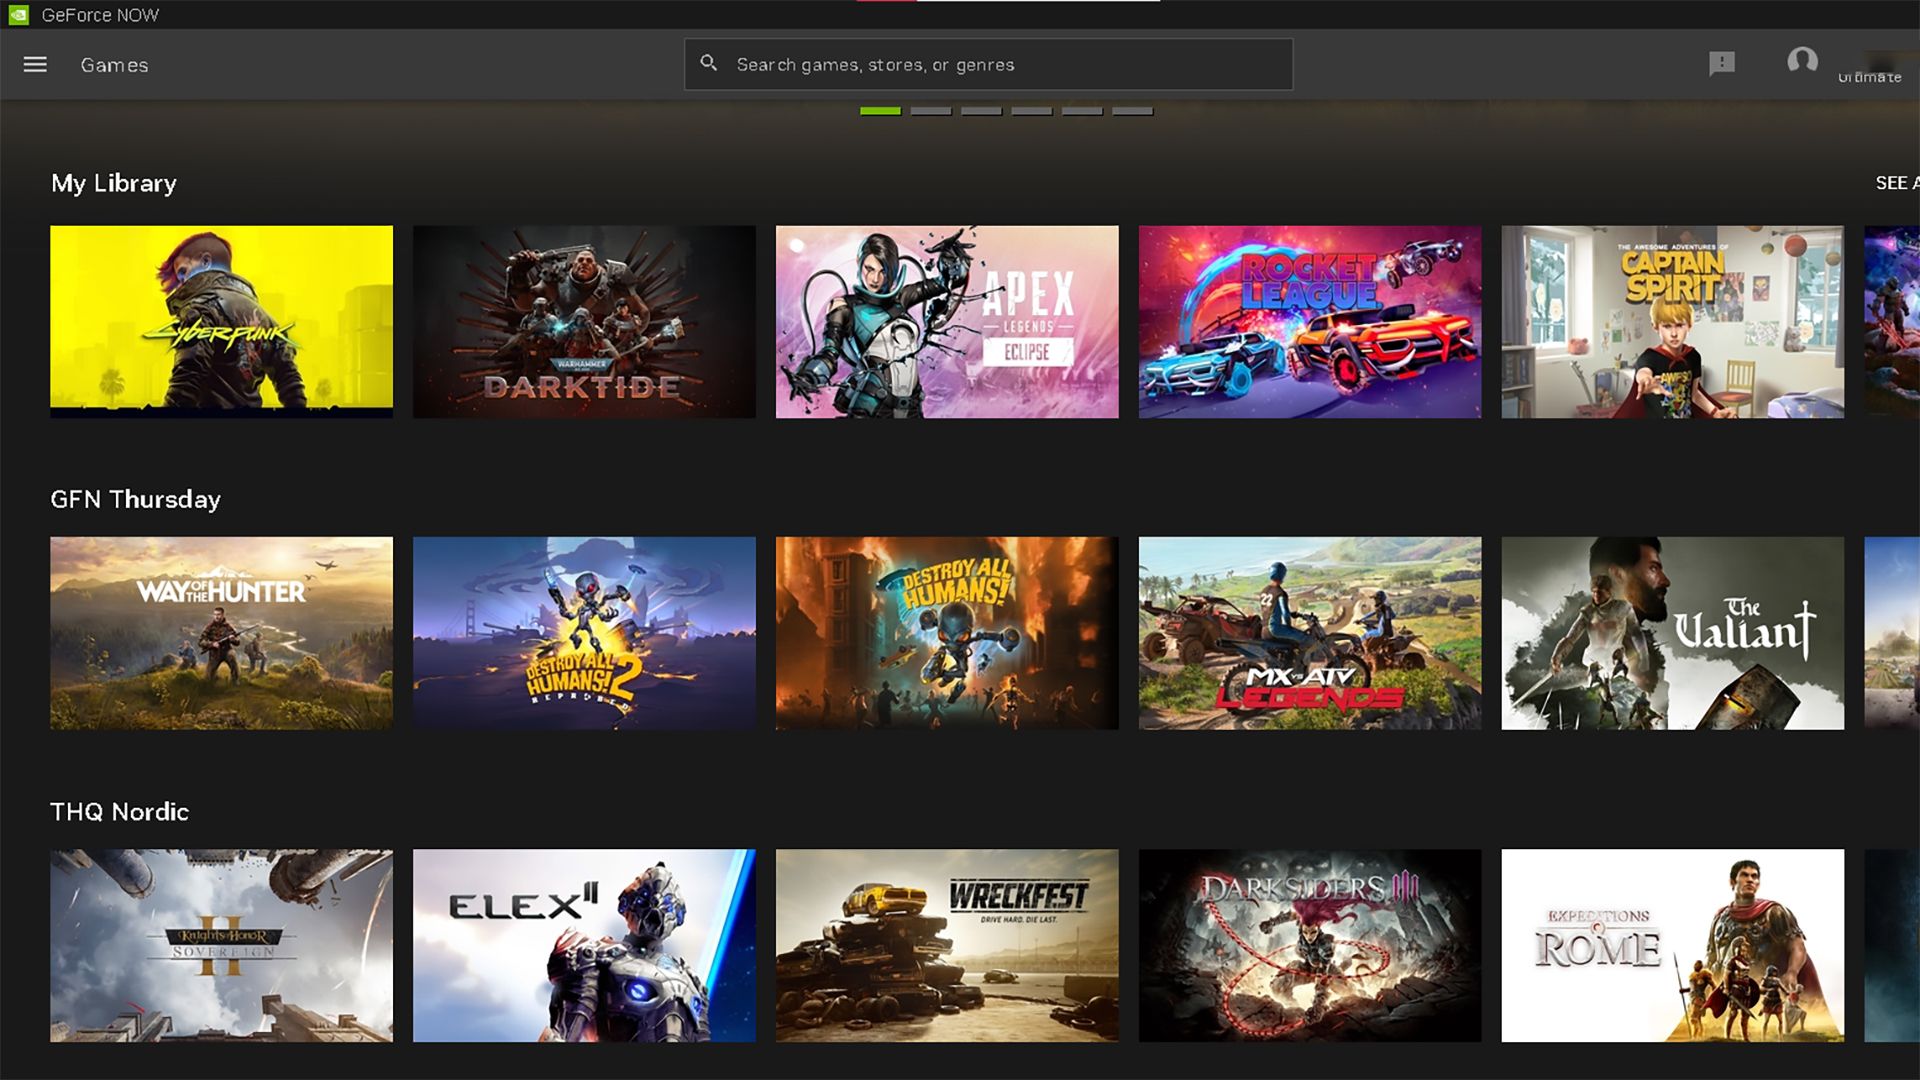 A screenshot of the GFN Thursday category in the NVIDIA GeForce NOW Windows app.